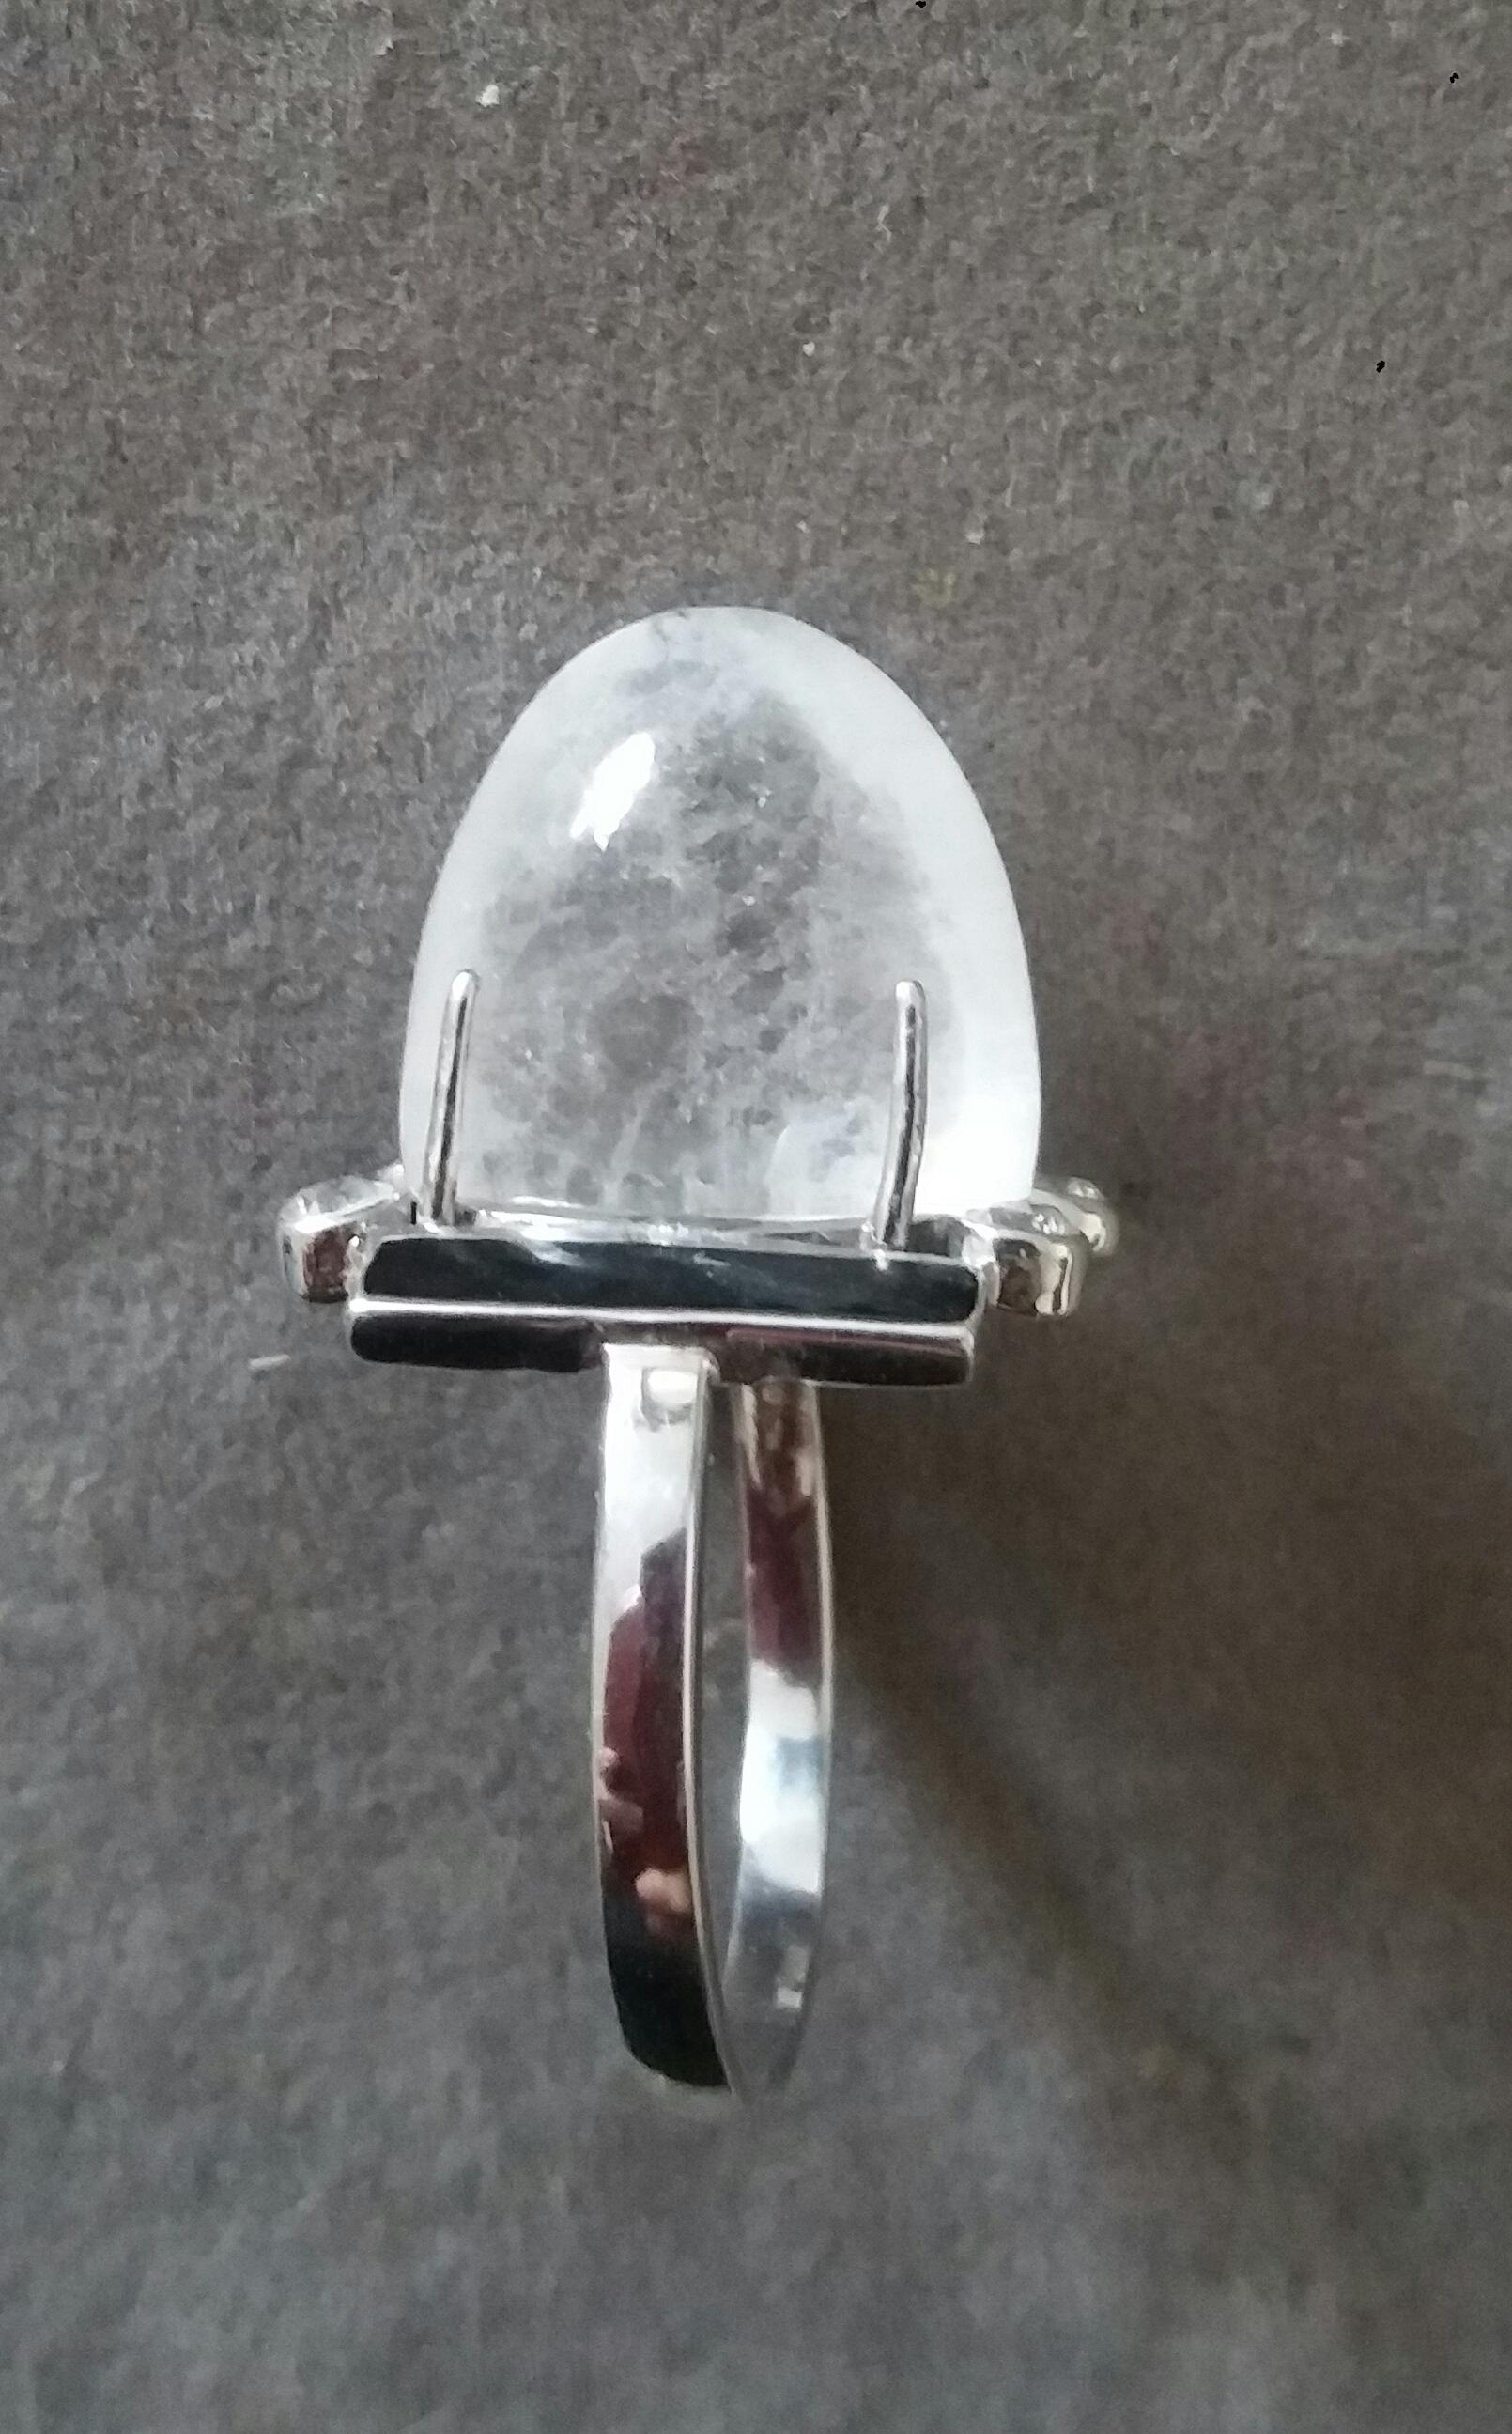 Classic Art Deco Style 14 Kt  white gold ring with a 18 Carat  Natural Quartz Sugar Loaf Shape Cabochon measuring 12x15x14 mm. surrounded by 4 full cut diamonds and 2 Black Enamel bars at the sides.

In 1978 our workshop started in Italy to make